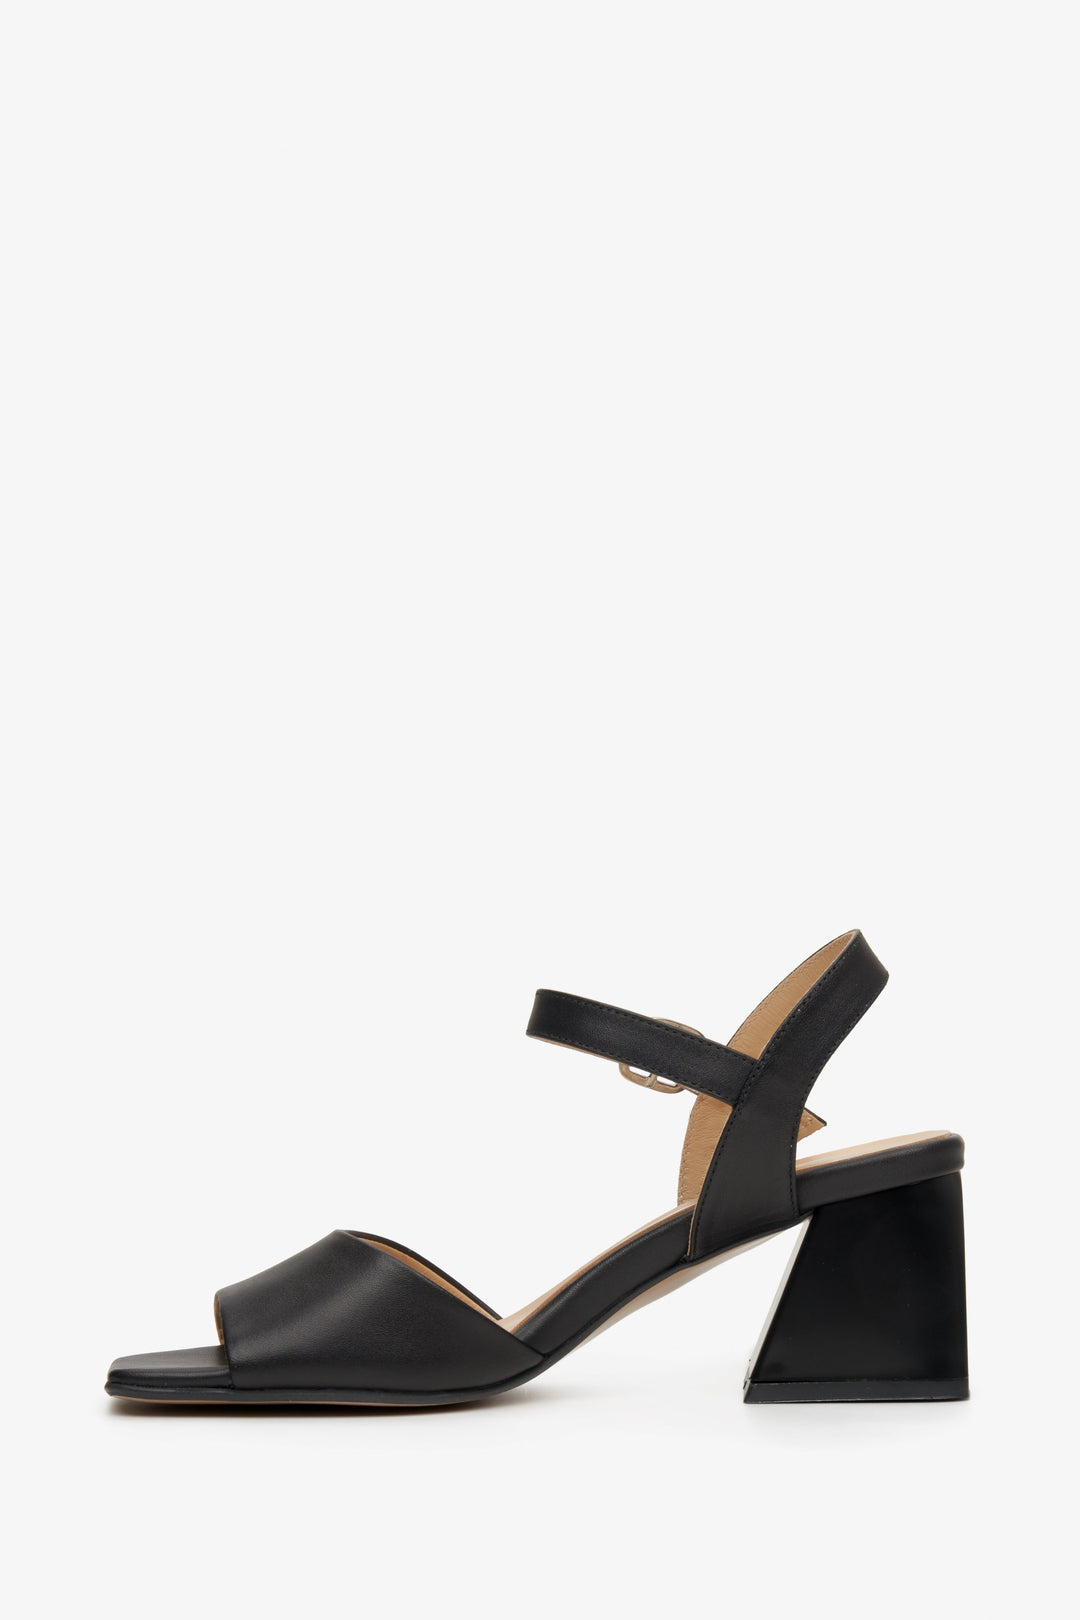 Women's black leather summer heeled sandals by Estro - presentation of the shoe profile.